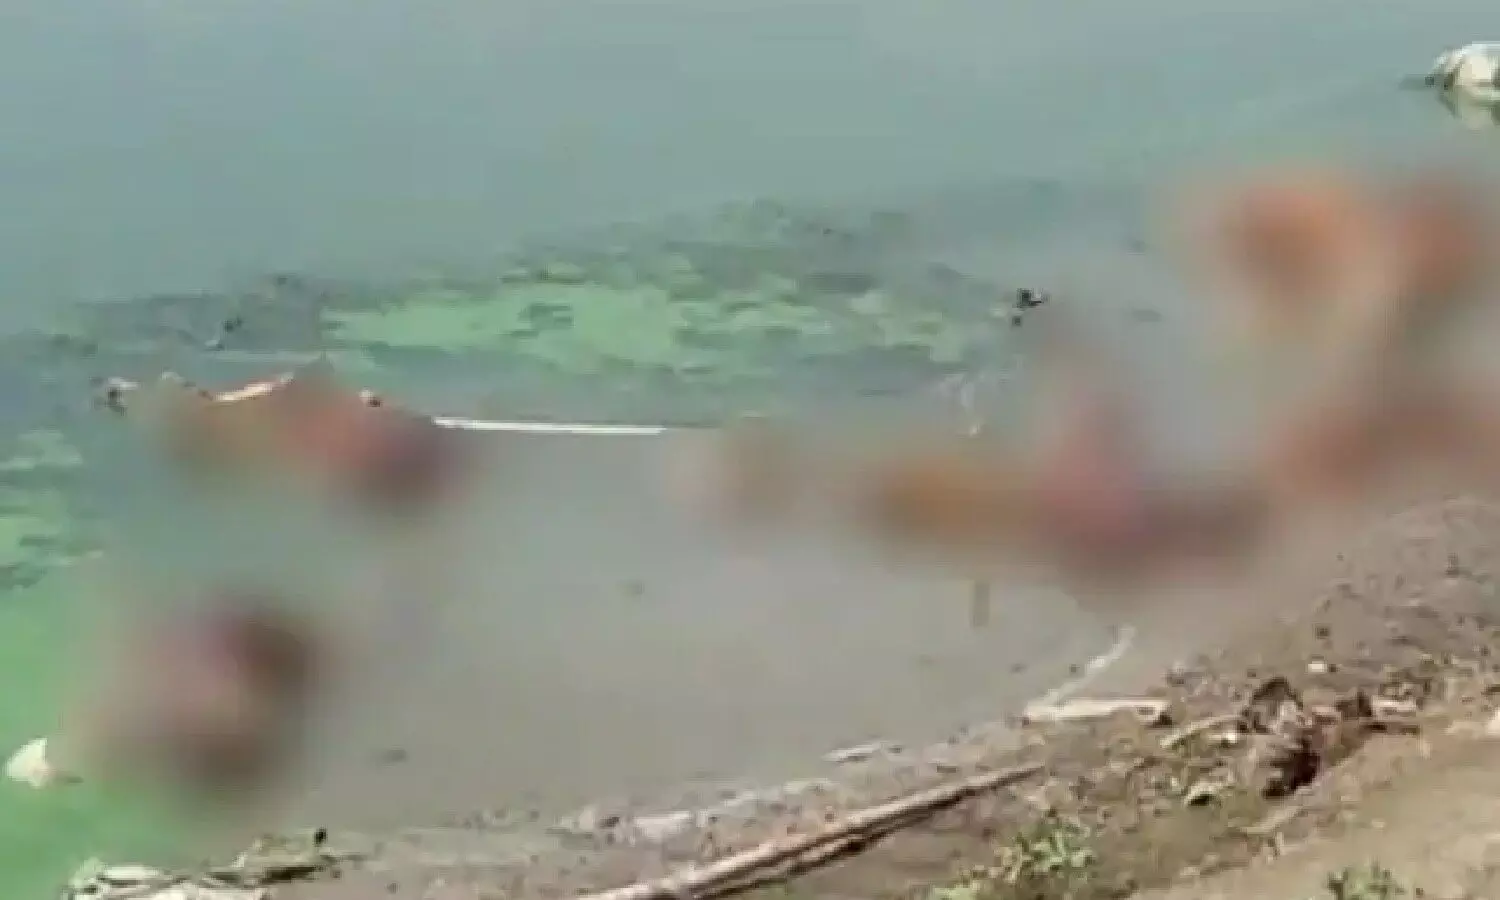 n Bihar, the Buxar district administration entered the border of Uttar Pradesh with the corpses flowing from the river